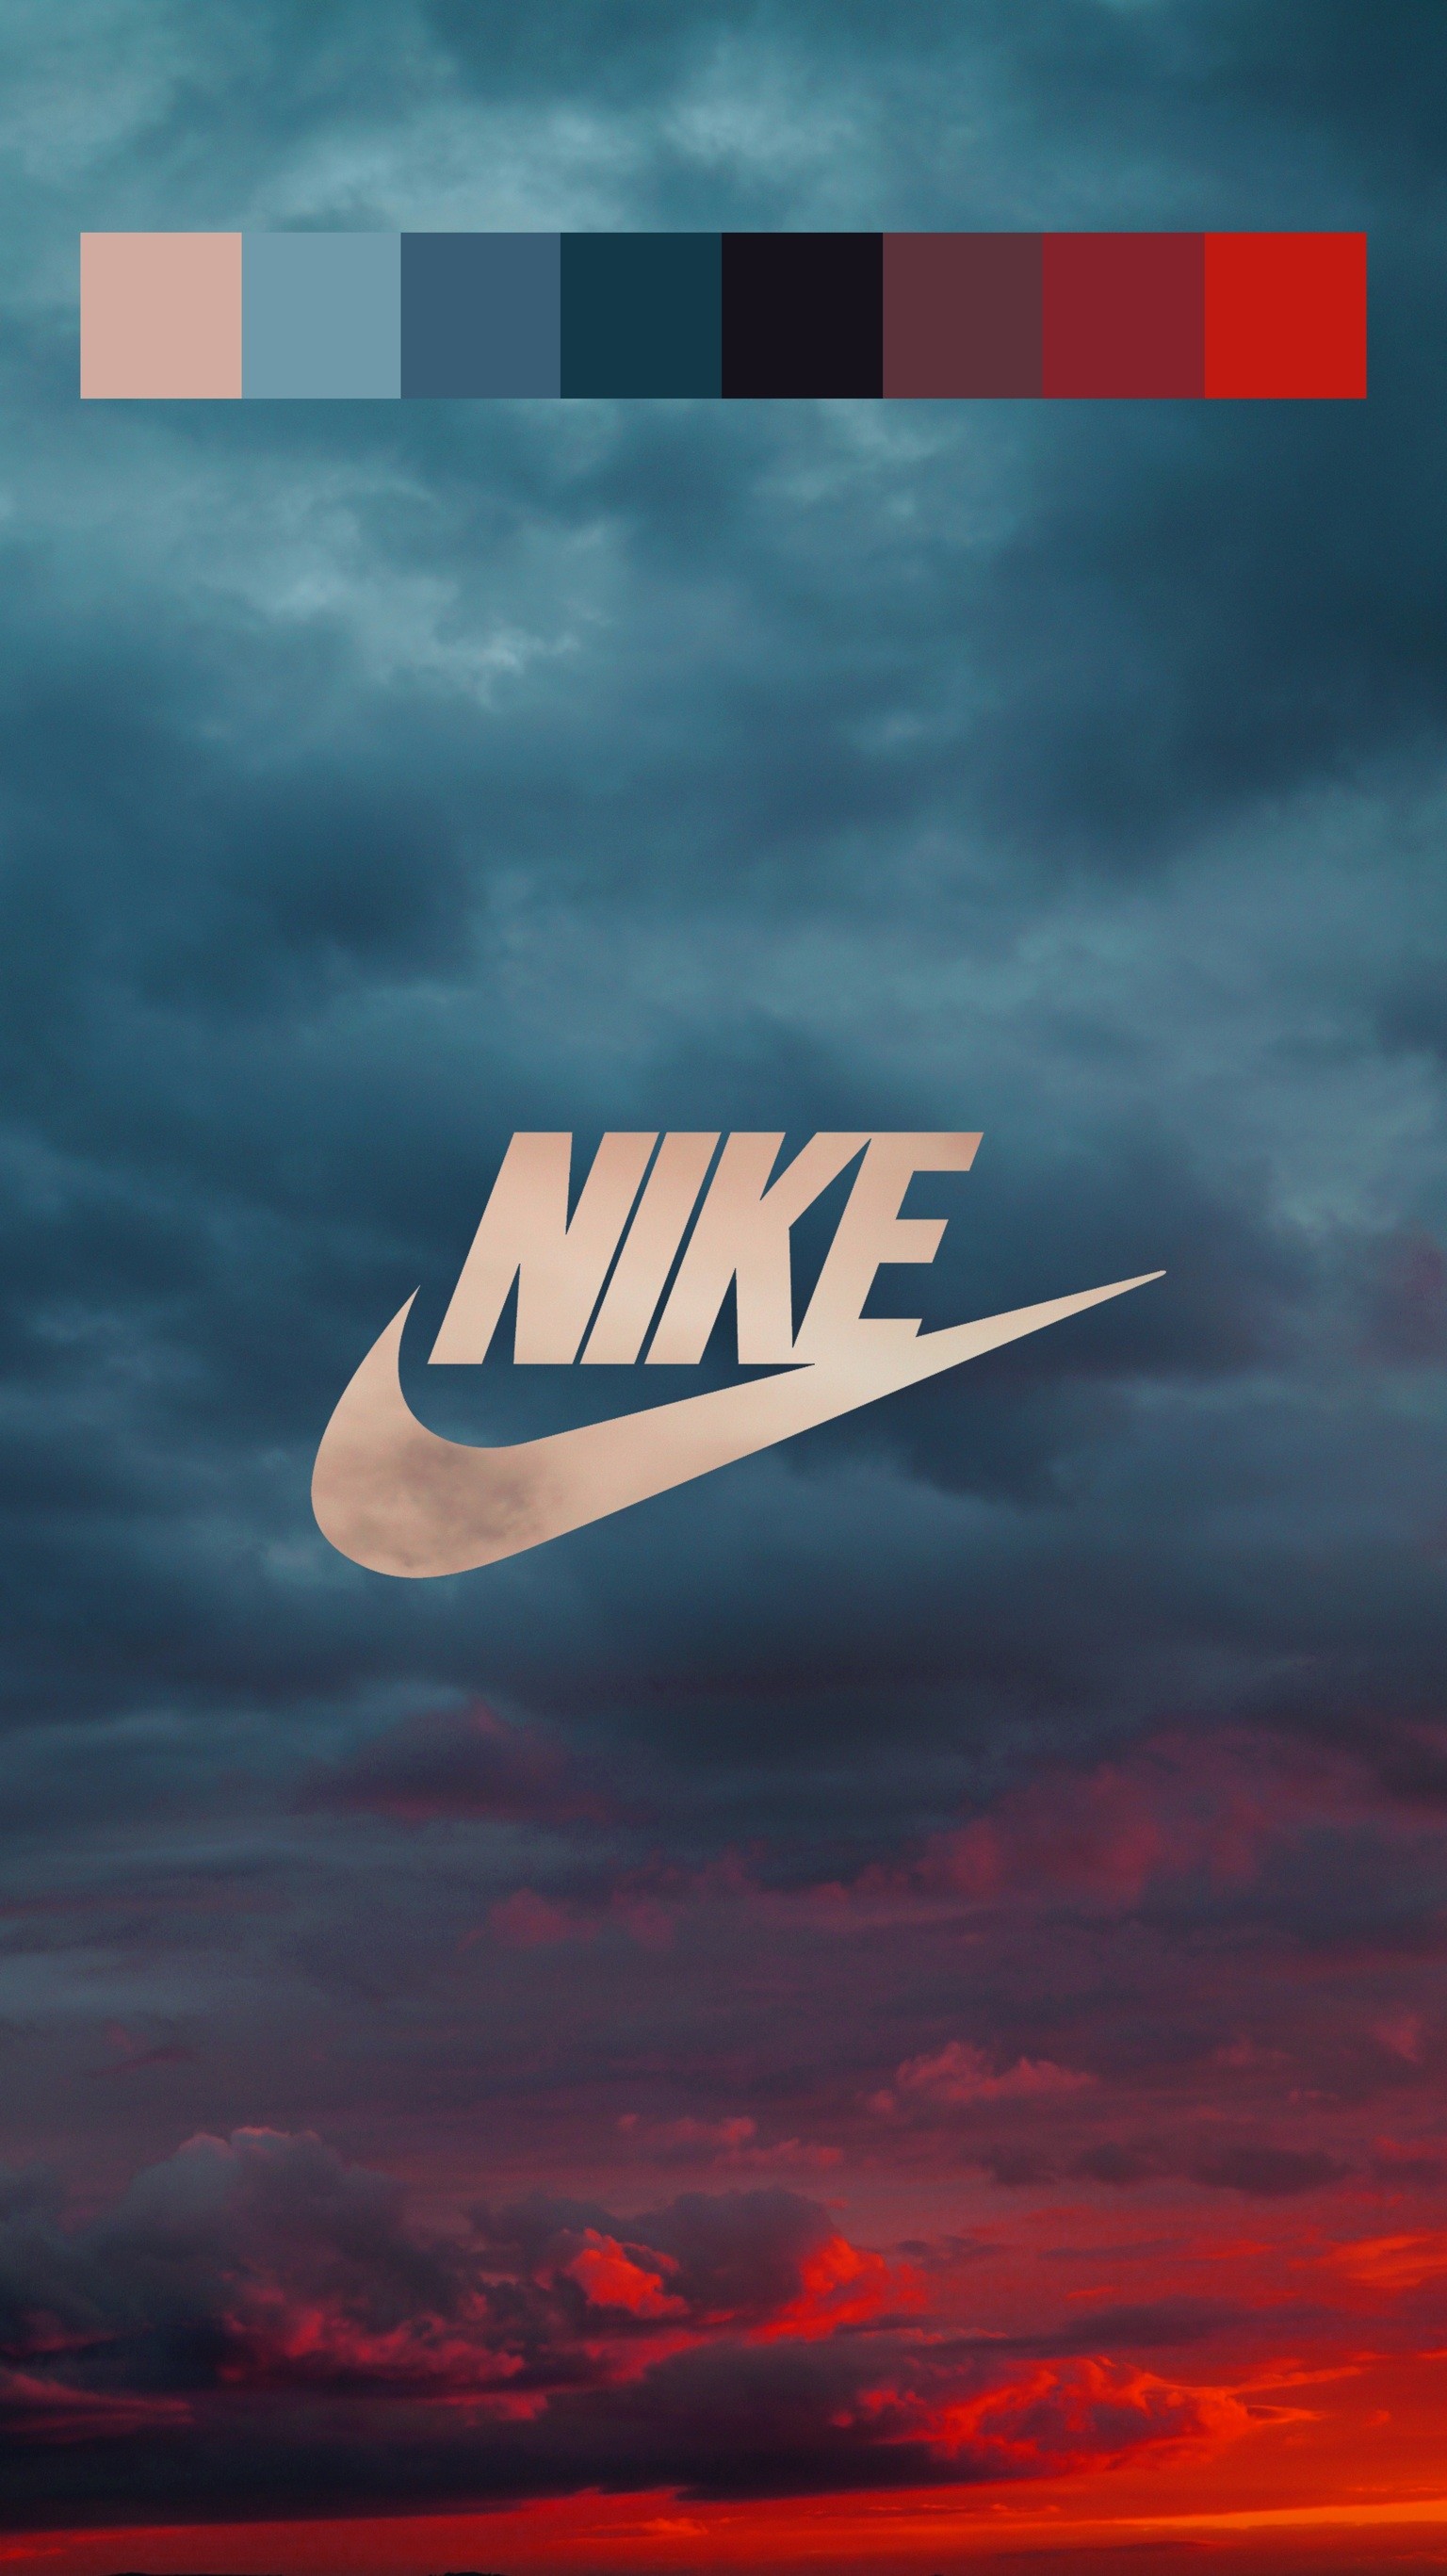 1536x2734 Iphone Wallpapers, Adidas, Iphone Backgrounds. more Nike